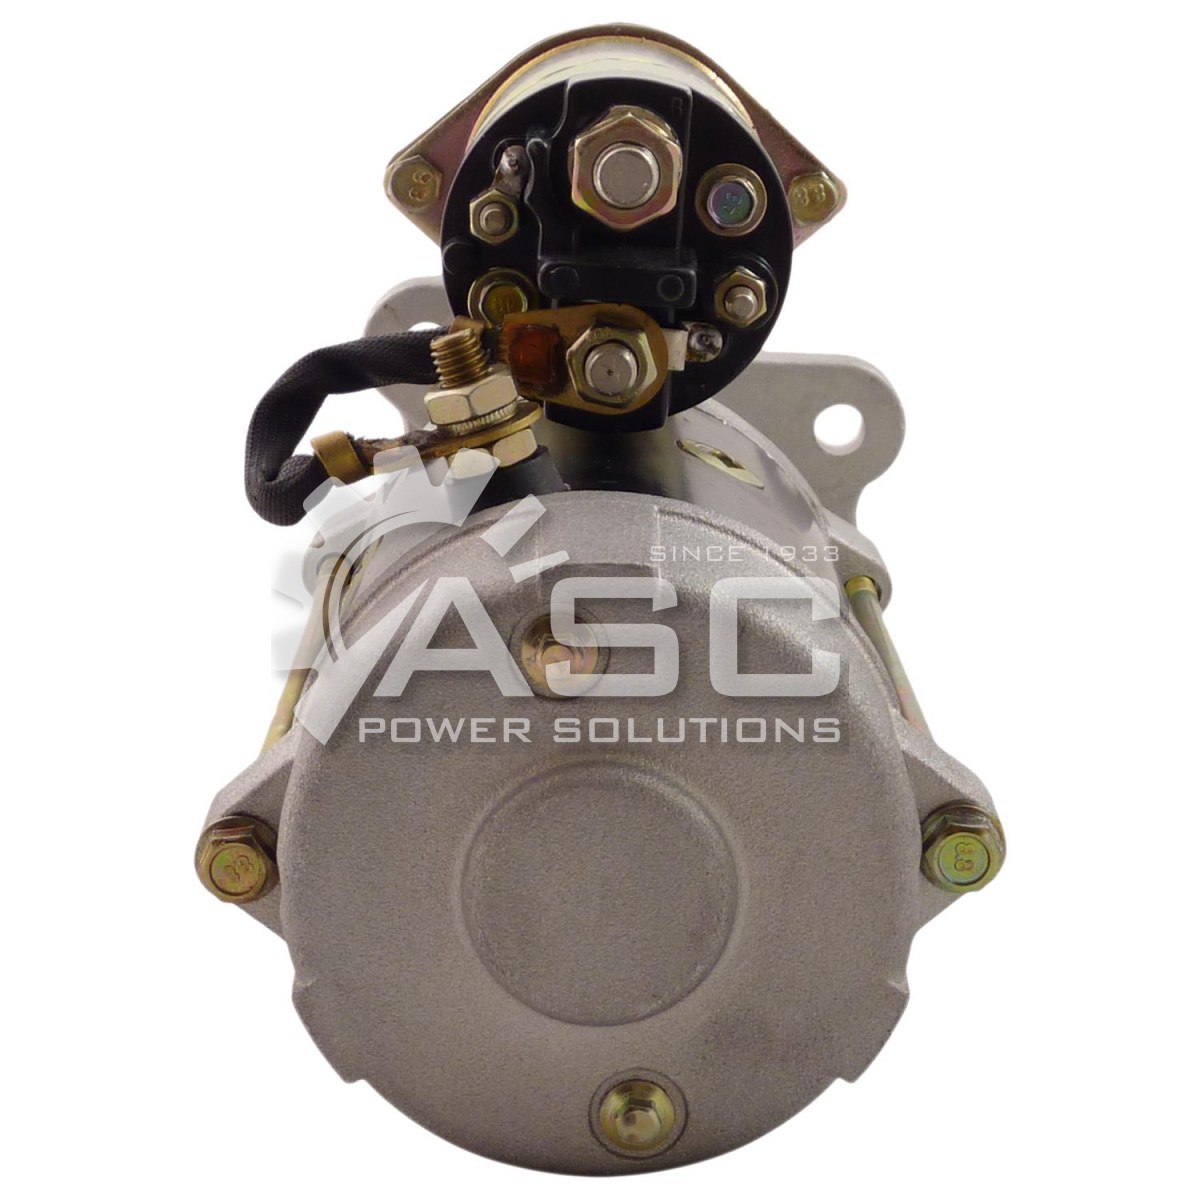 S122095_REMAN ASC POWER SOLUTIONS DELCO STARTER MOTOR FOR BOBCAT AND CLARK APPLICATIONS 12V 10 TOOTH CLOCKWISE ROTATION OFF SET GEAR REDUCTION (OSGR)